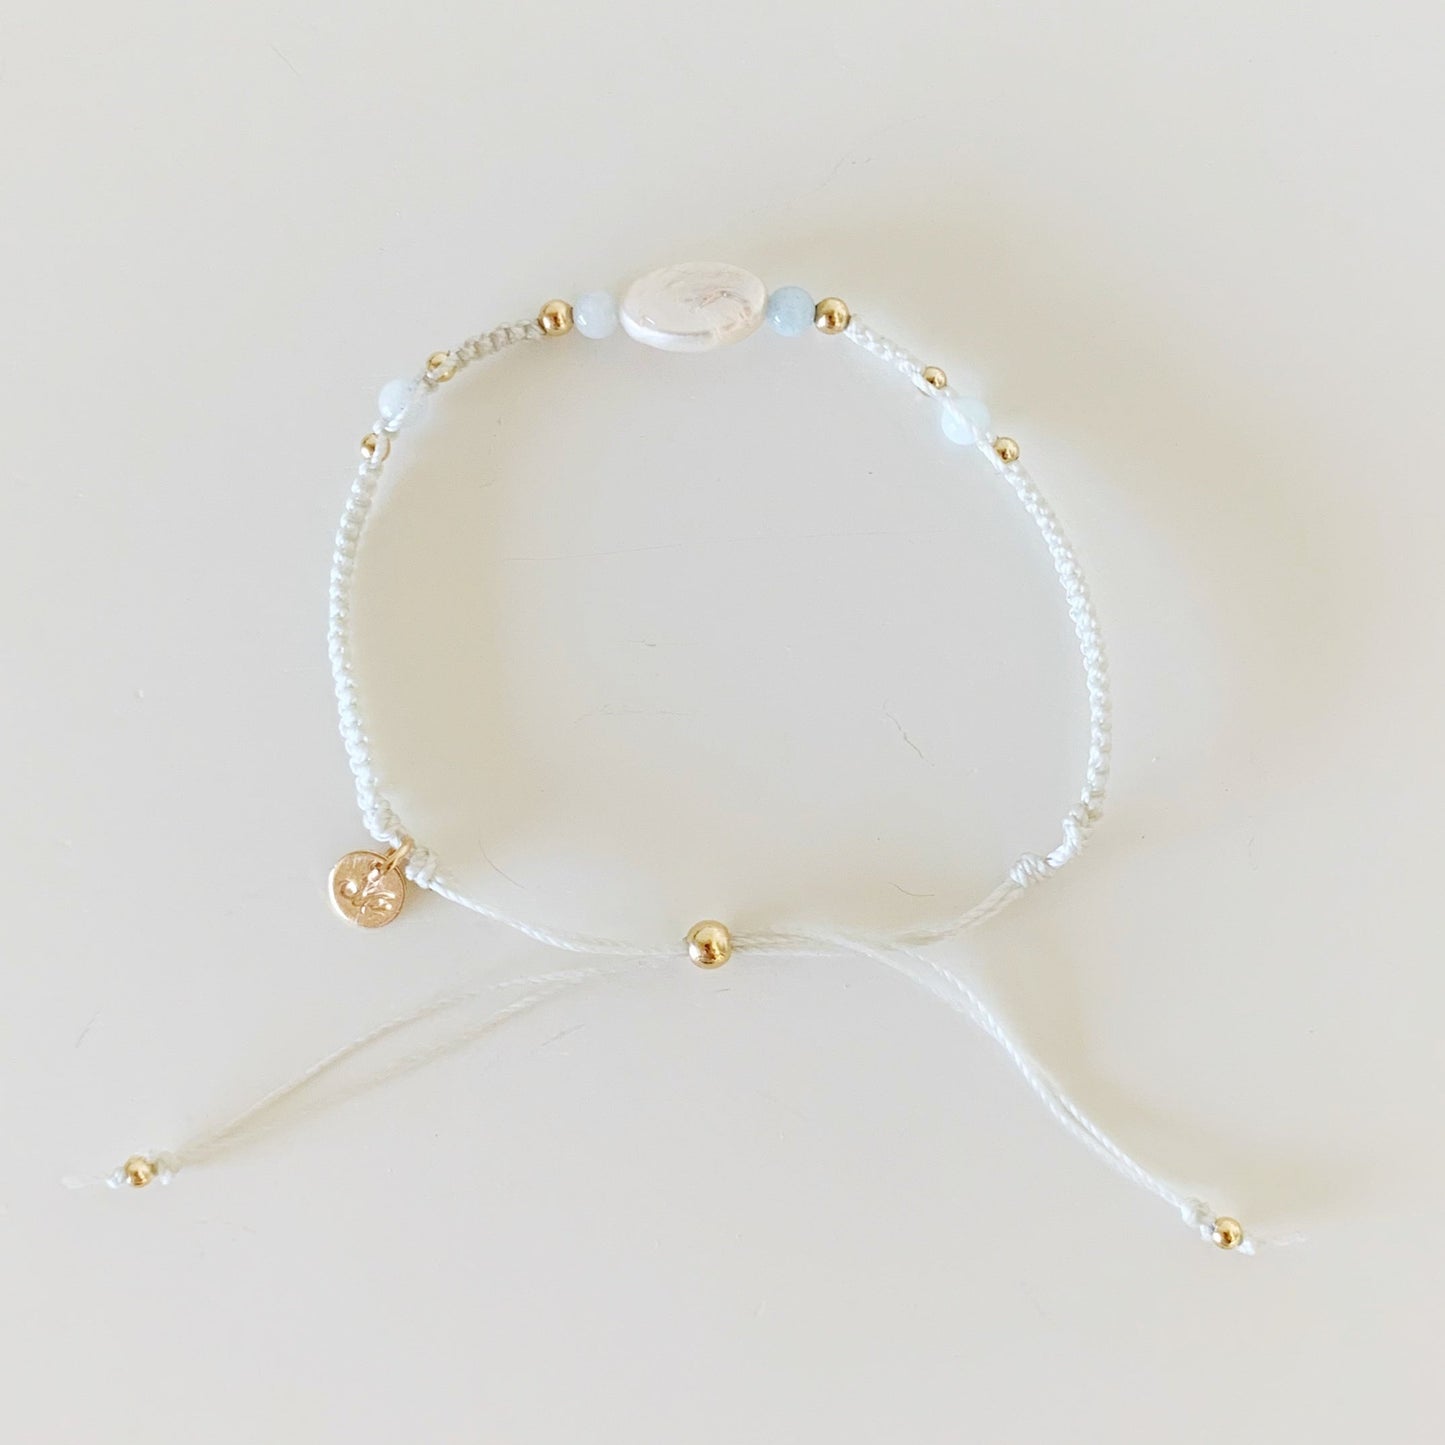 the world is your oyster bracelet by mermaids and madeleines is an adjustable macrame bracelet  designed with white shell cord and freshwater oval pearl at the center with aquamarine beads on both sides. this bracelet is photographed from the top town in full view on a white surfaace